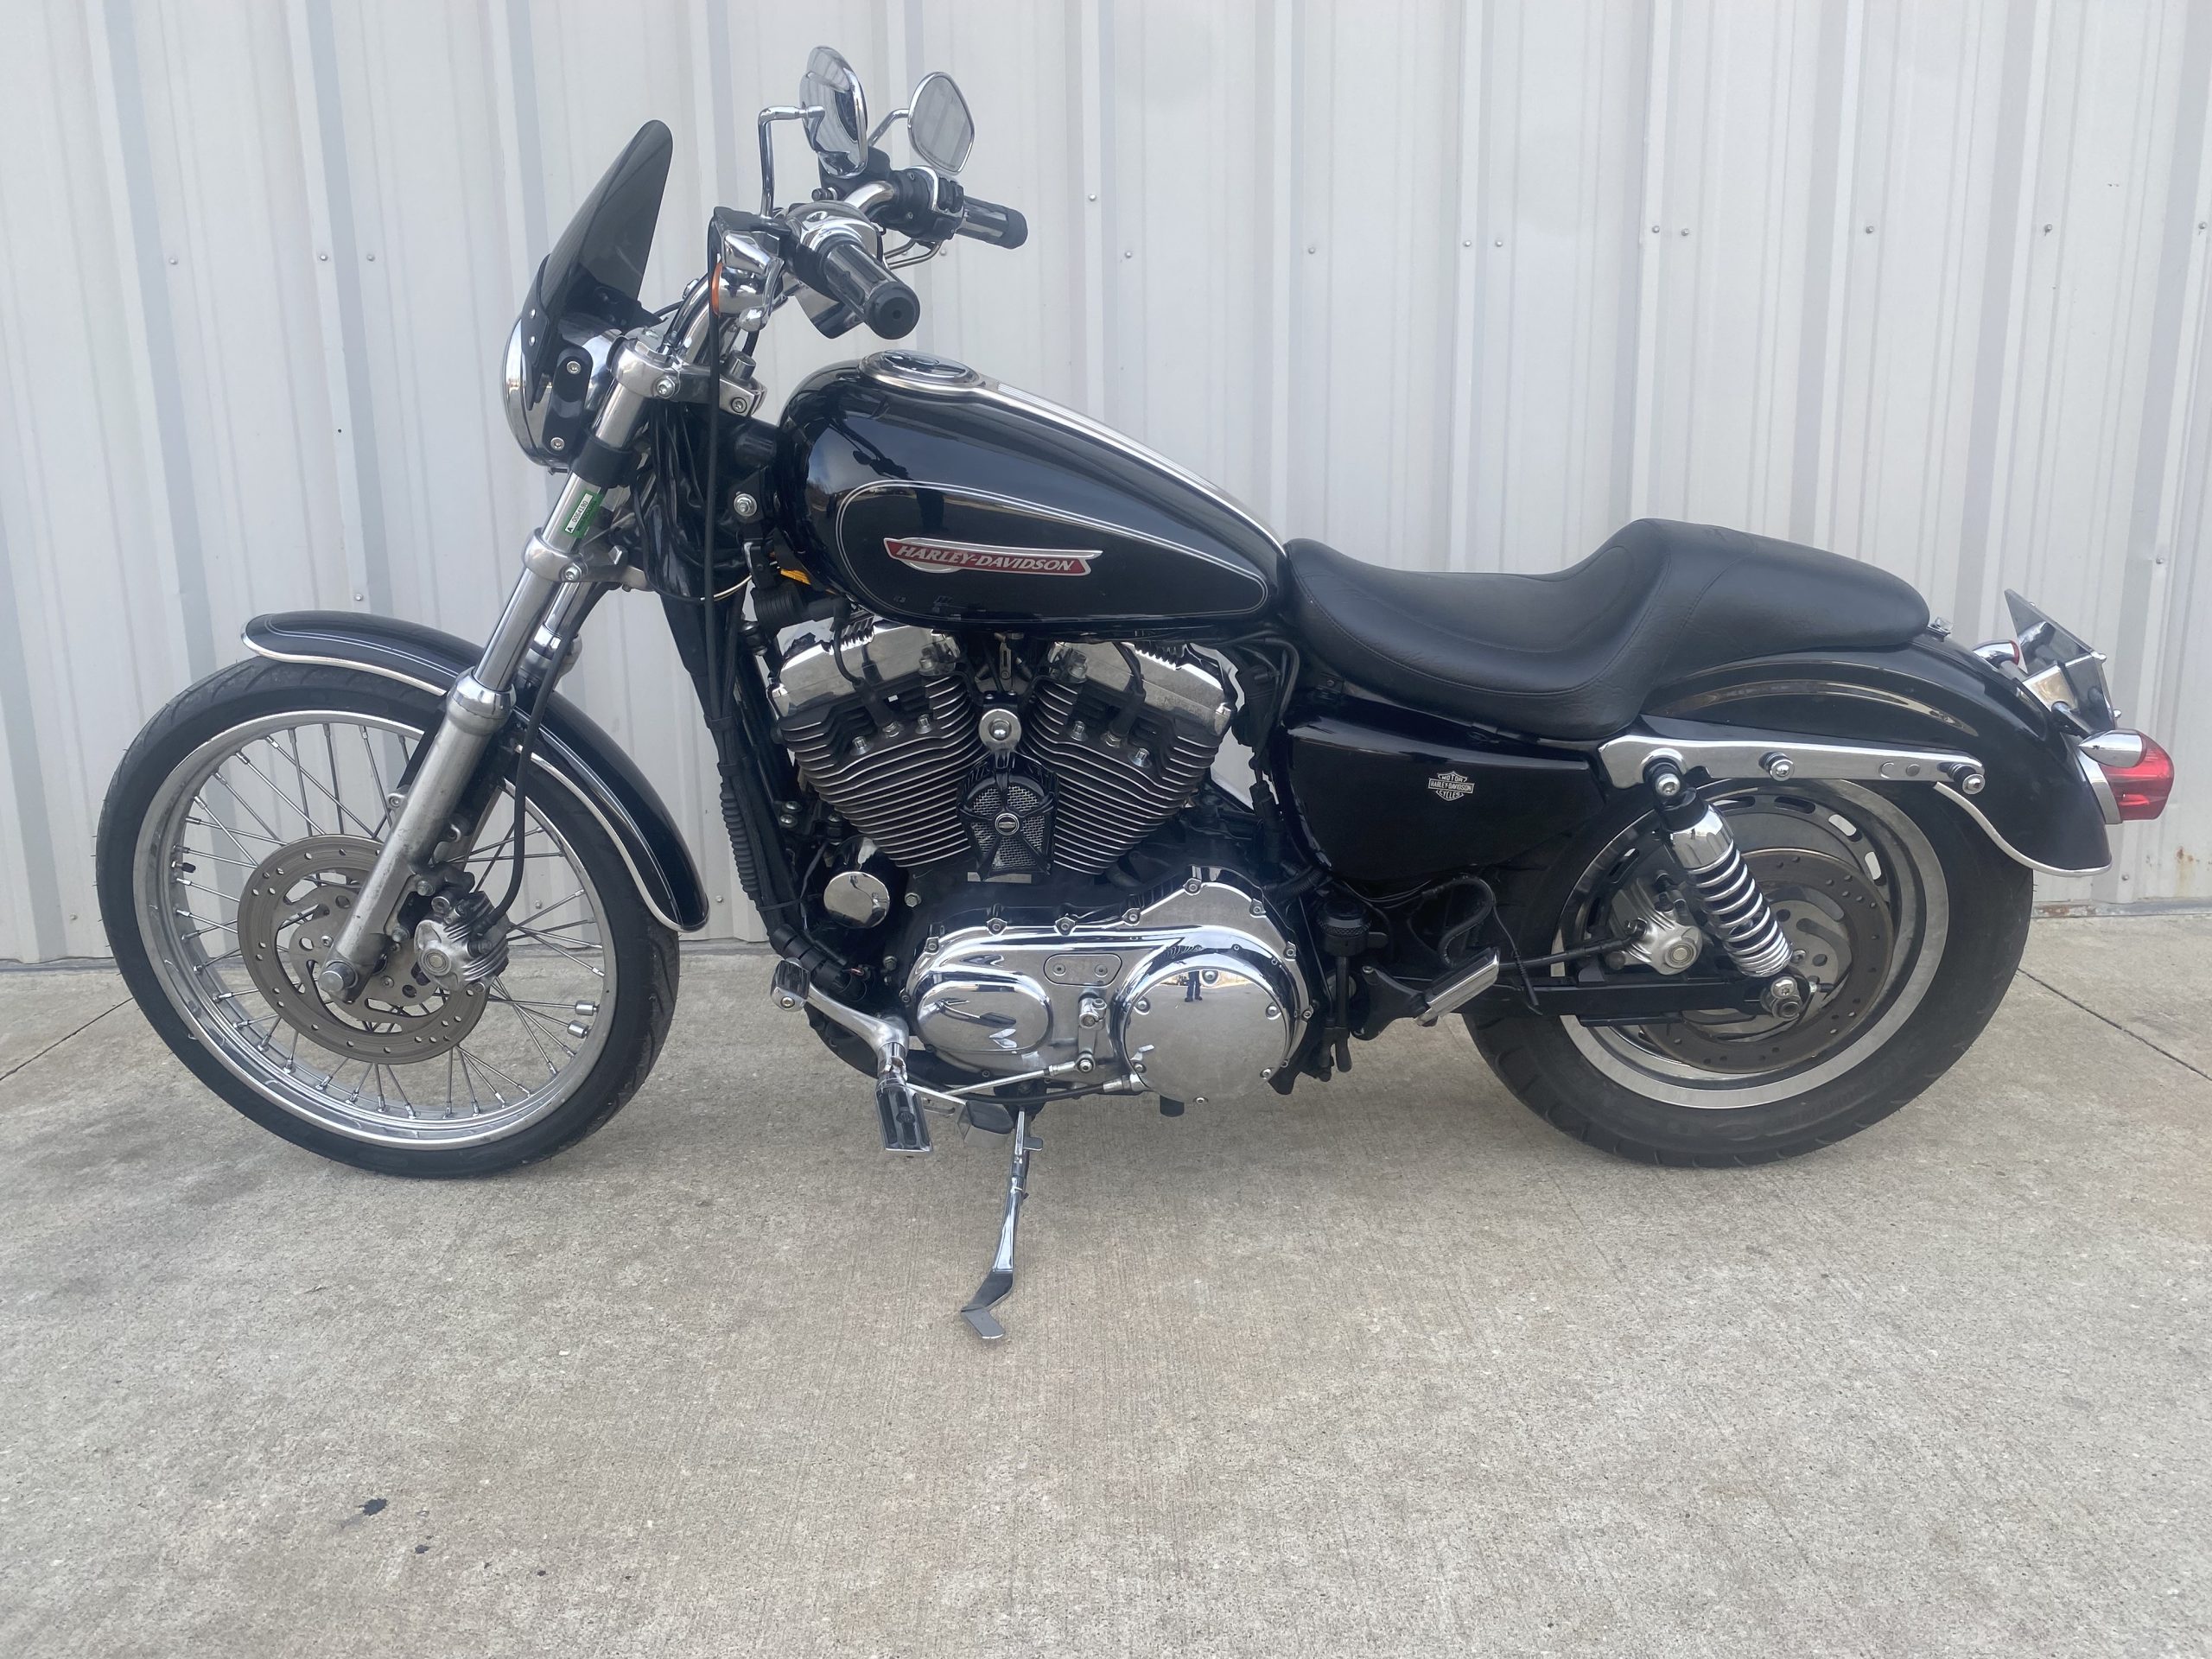 Used Harley Davidson For Sale, Rare Find: Used 2008 Harley Davidson 1200C Sportster in Vivid Black for Sale at Knobtown Cycle &#8211; Only $5,500!, Knobtown Cycle